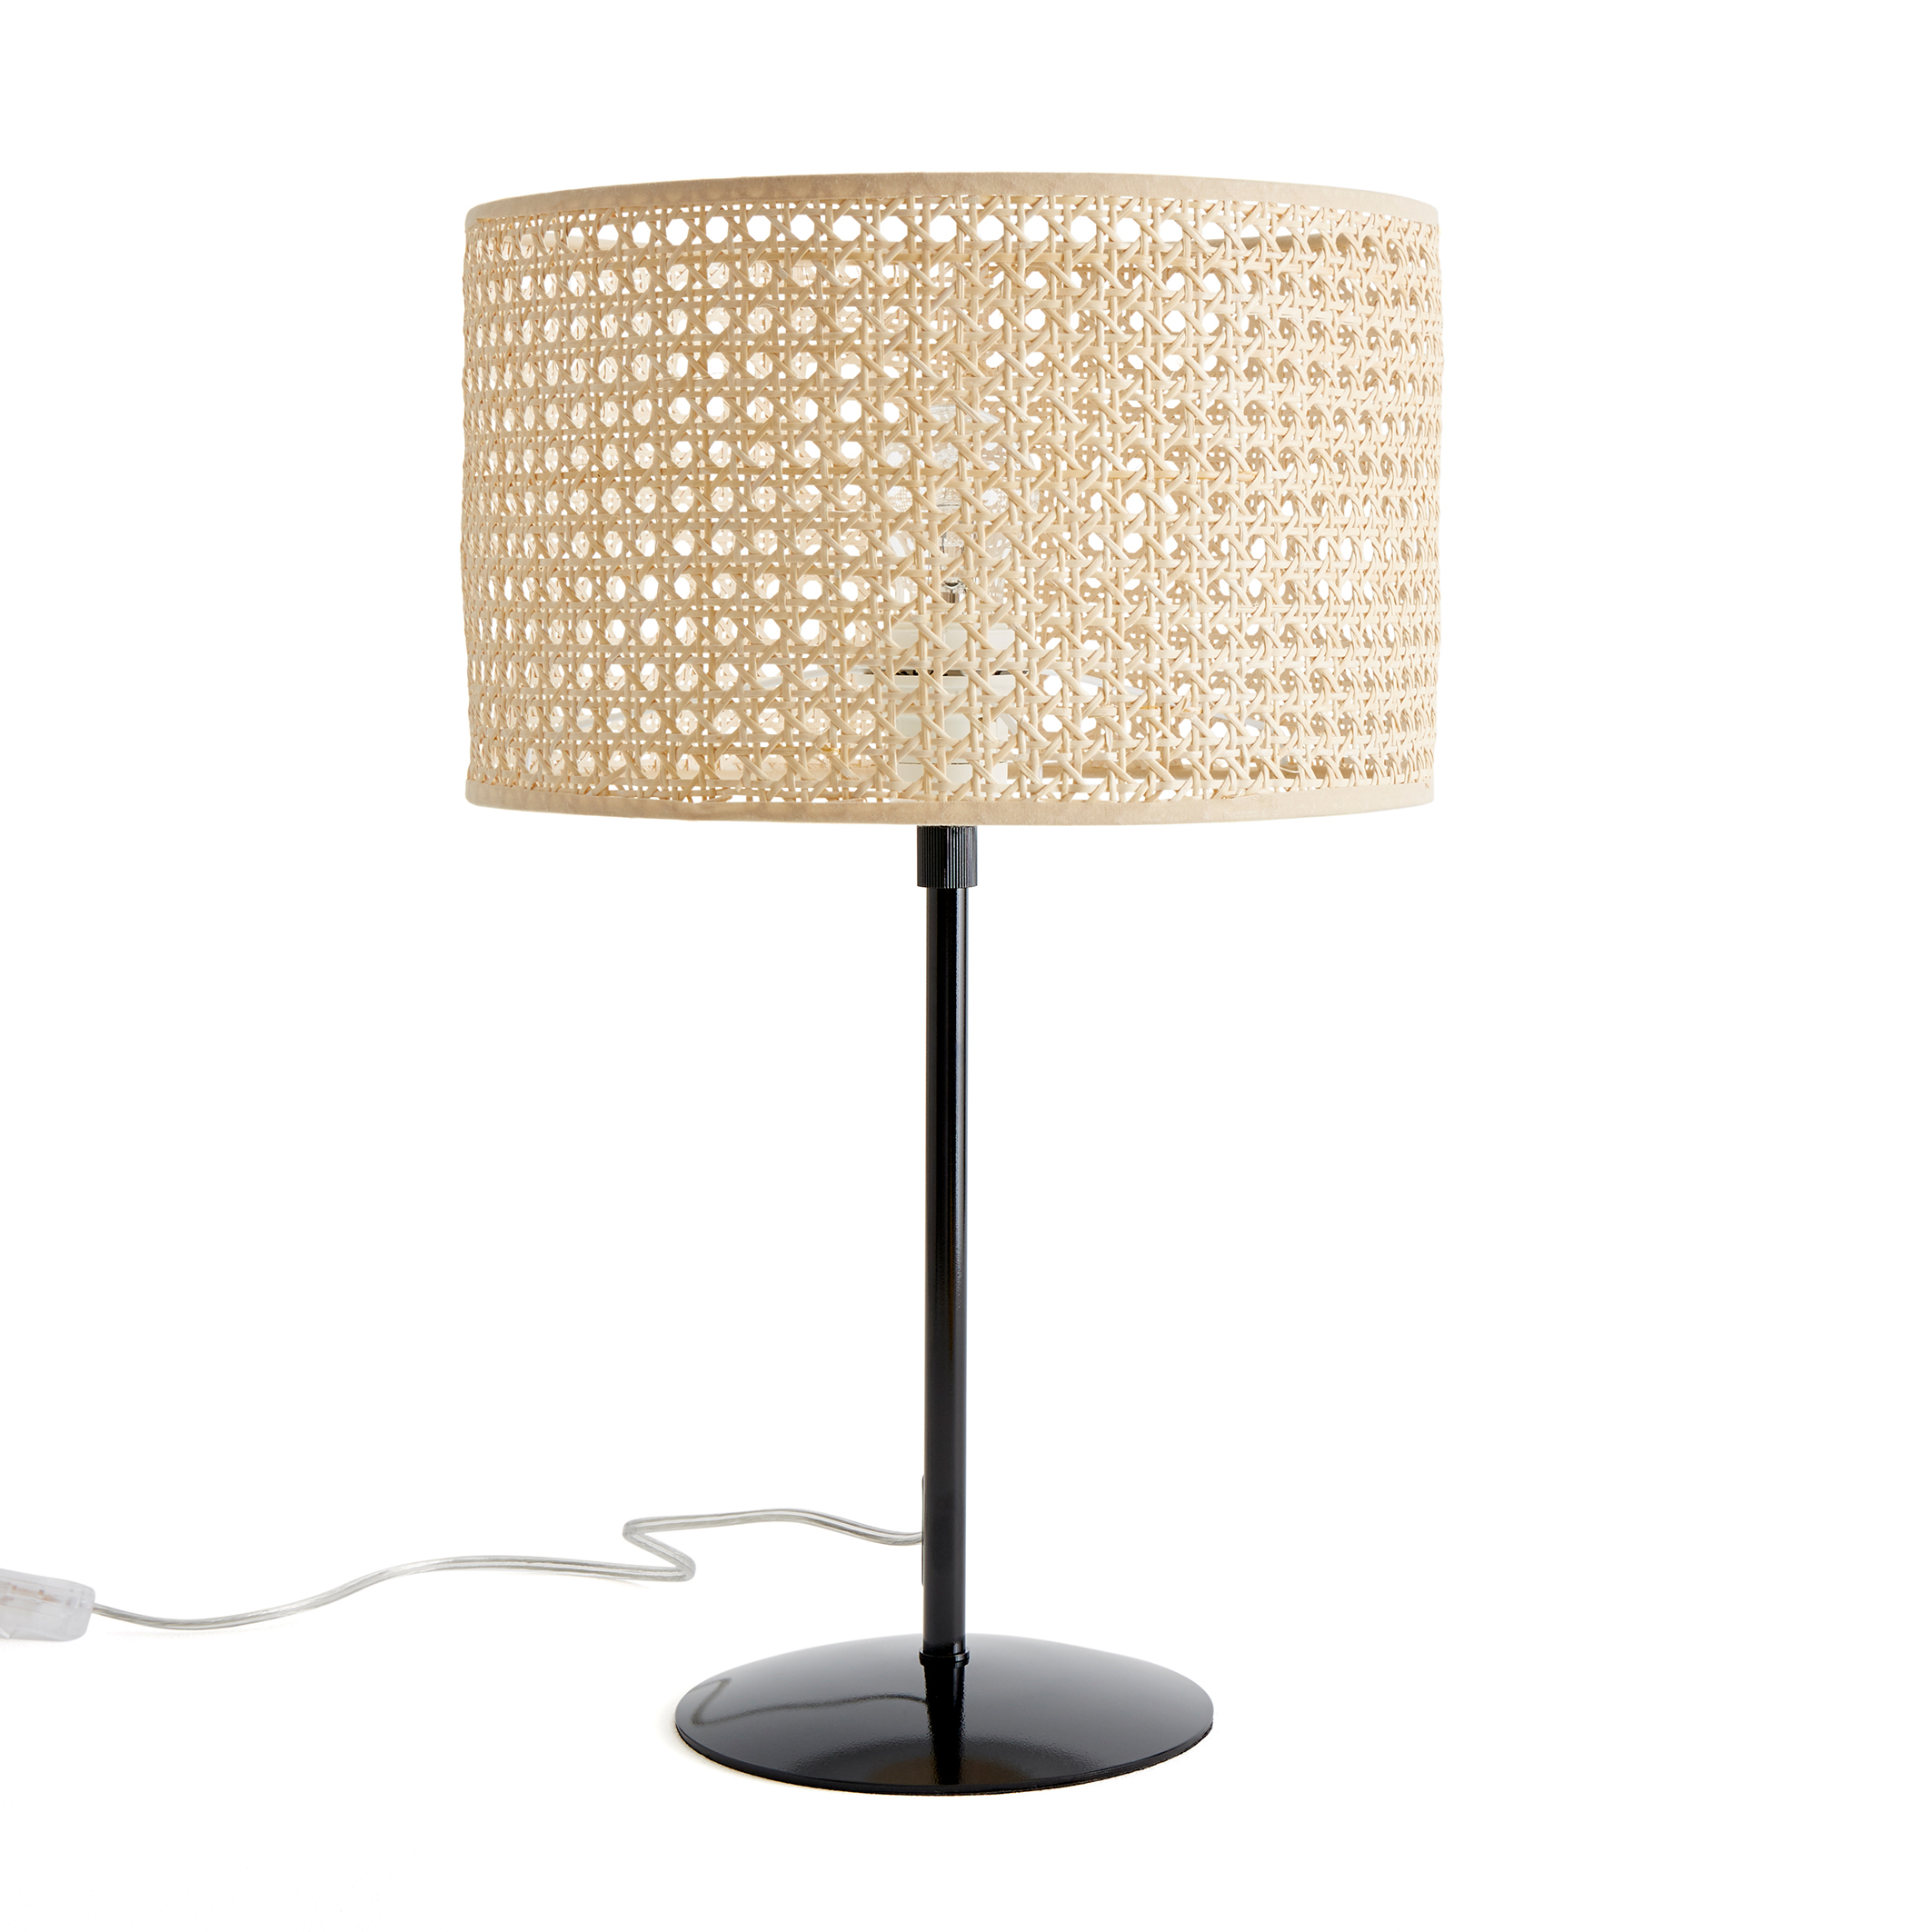 Dolkie Rattan Woven Lamp Shade Natural, Woven Cane Floor Lamp